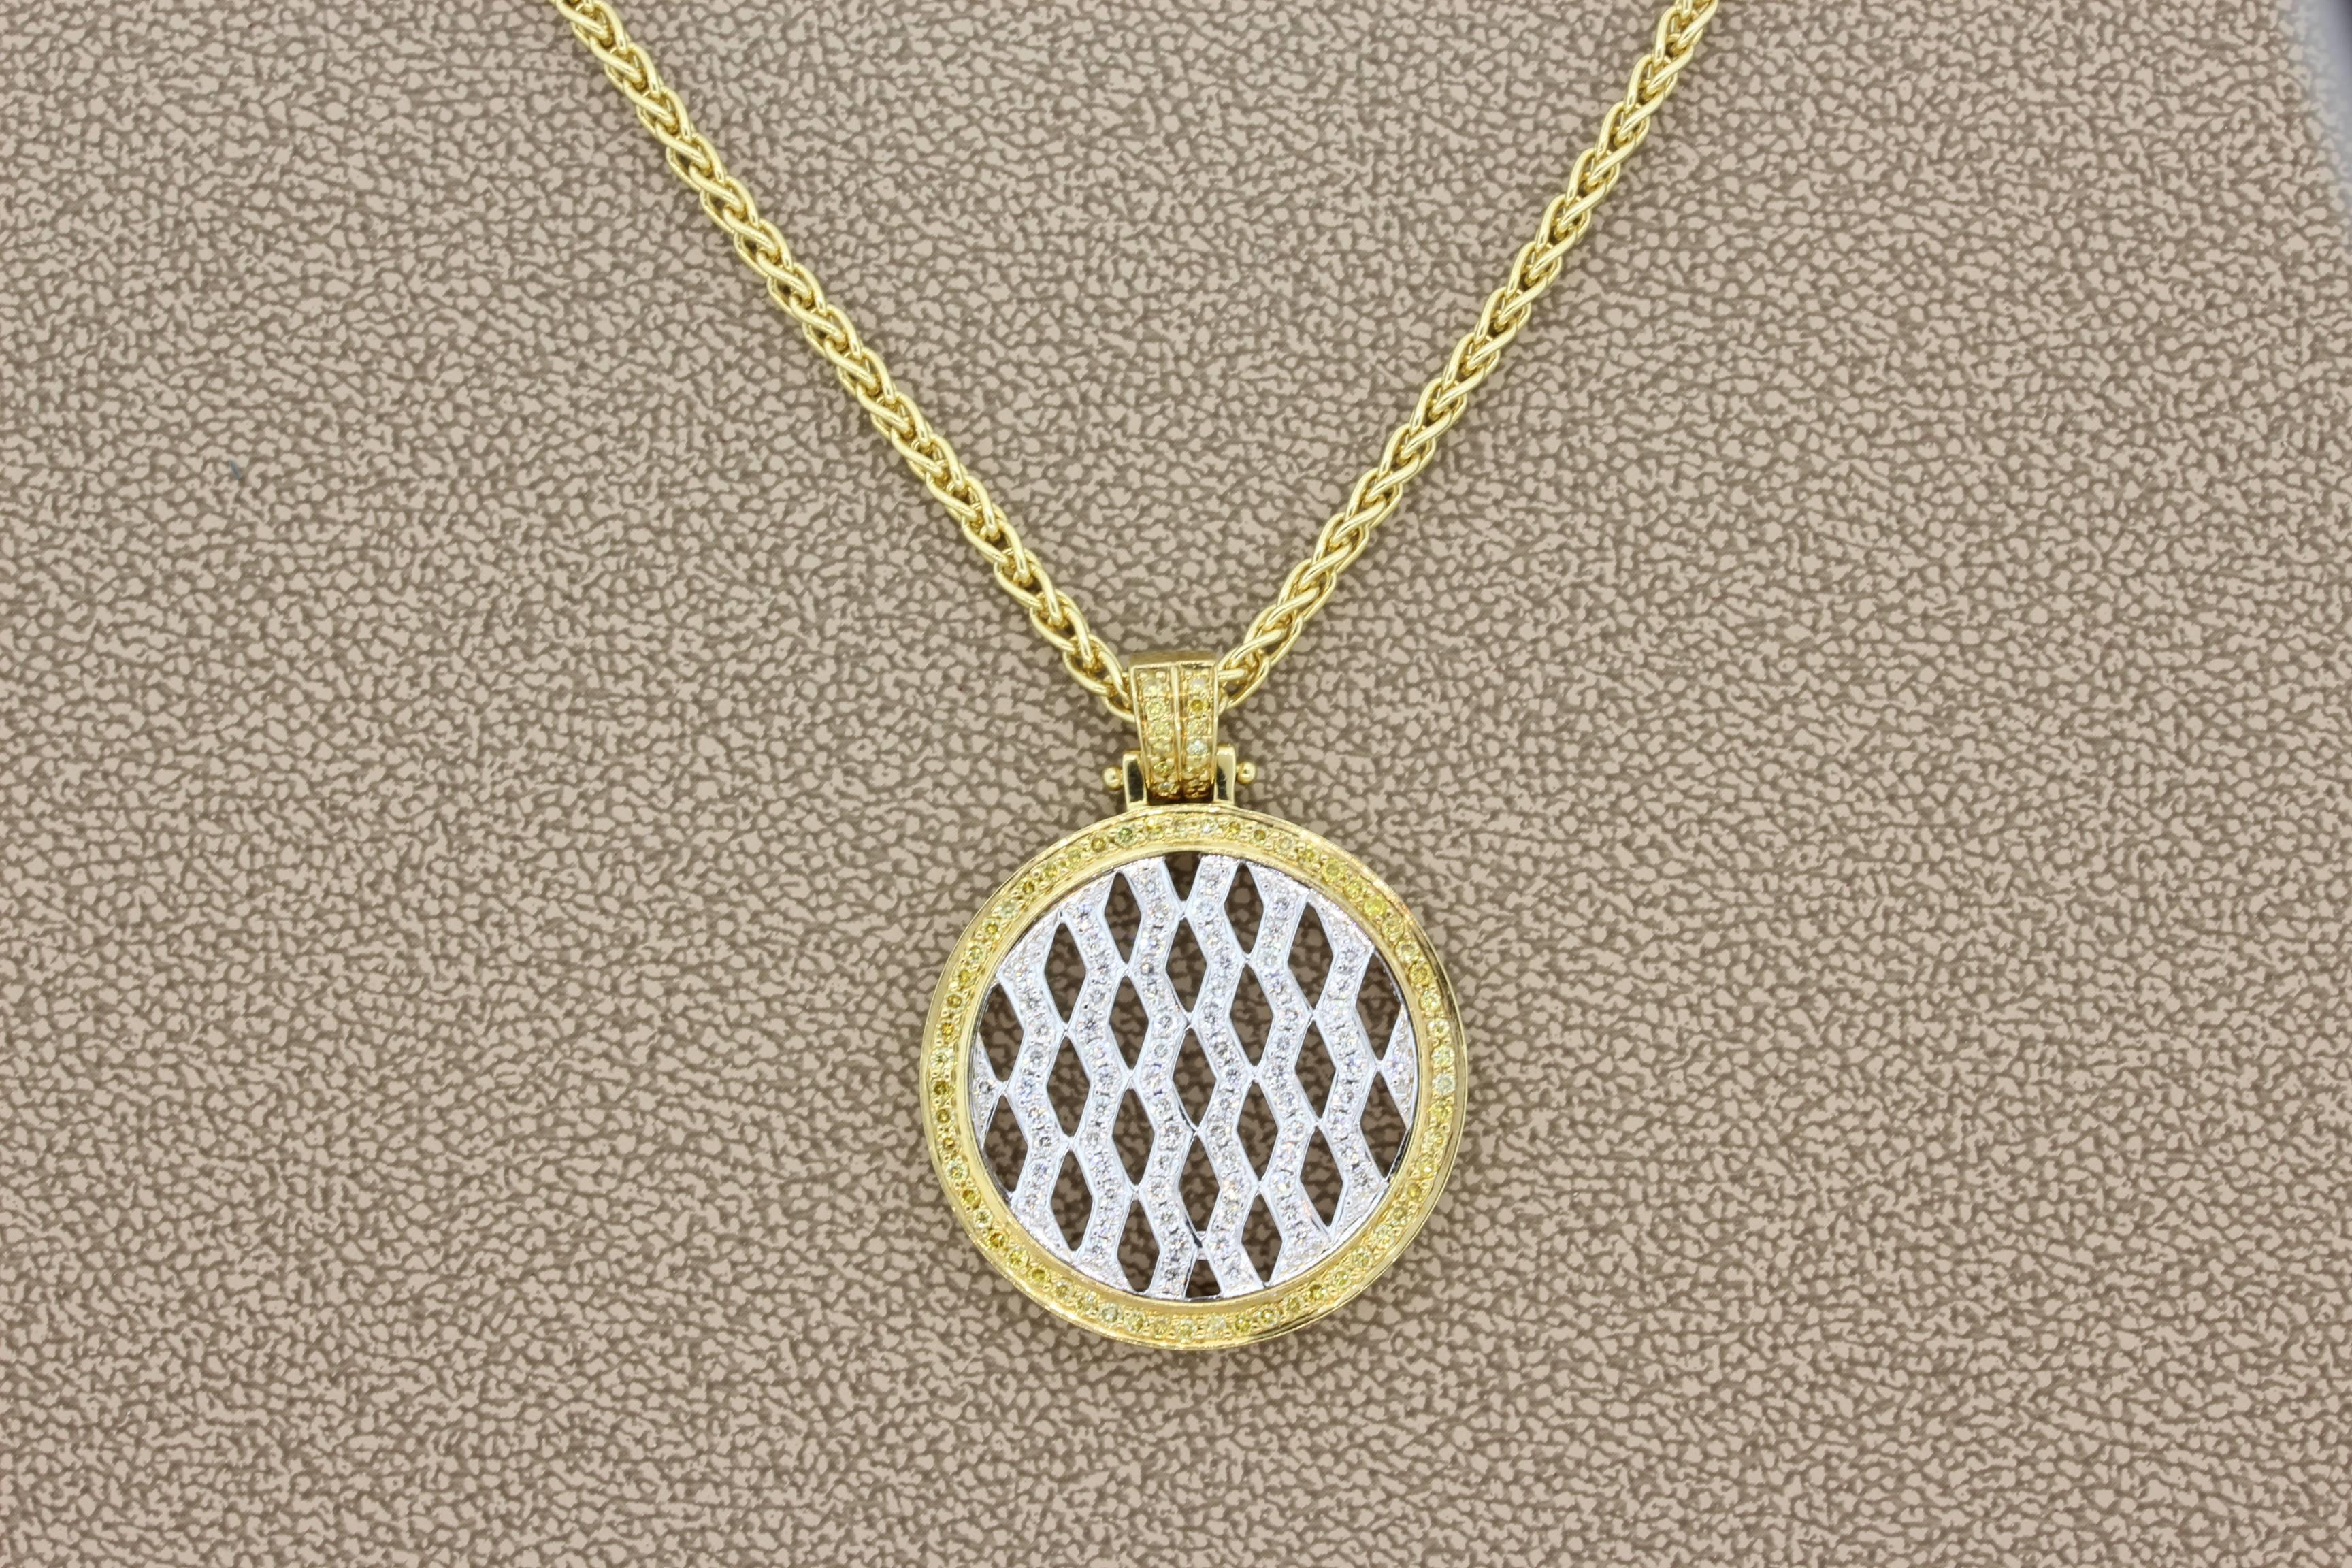 A quality made pendant by Neil Joseph which features 1.22 carats of VS quality white and yellow round cut diamonds set in 18K white and yellow gold. Made in Italy. Comes with hand made braided chain necklace, 20 inches. 

Dimensions: 1.5 x 1.1